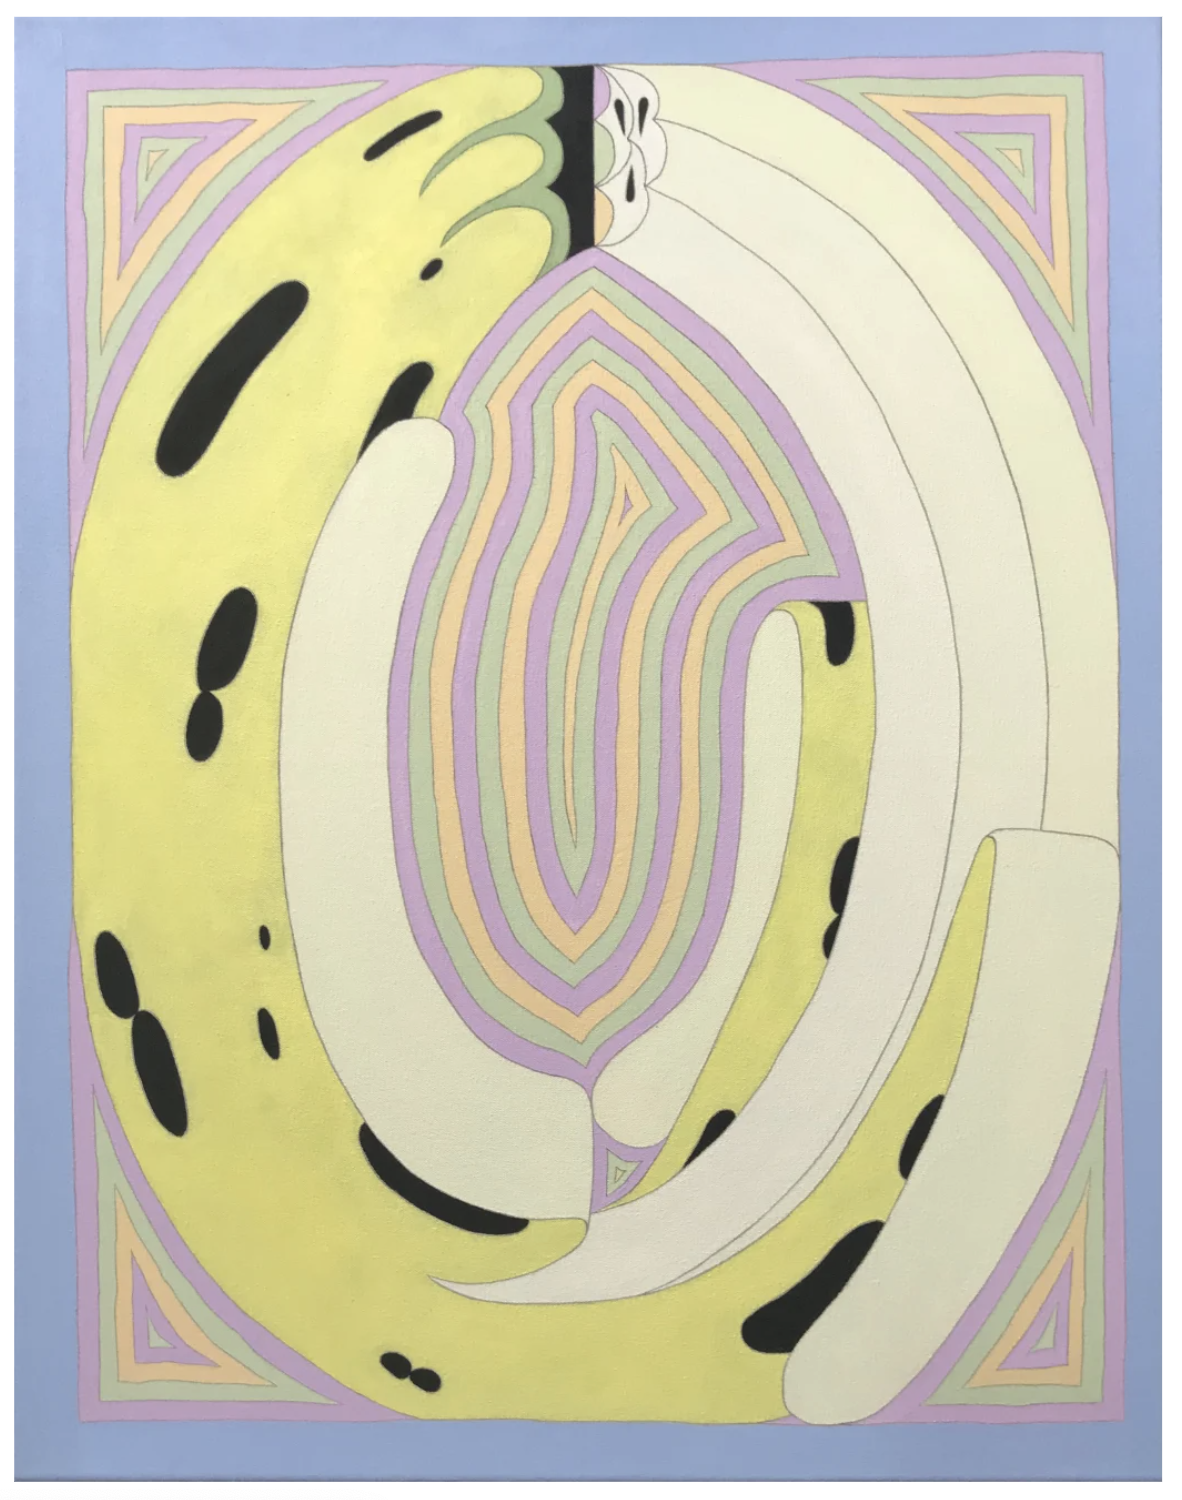  BANANA OUROBOROS, 2022  acrylic and graphite on raw canvas  28 x 22 in 